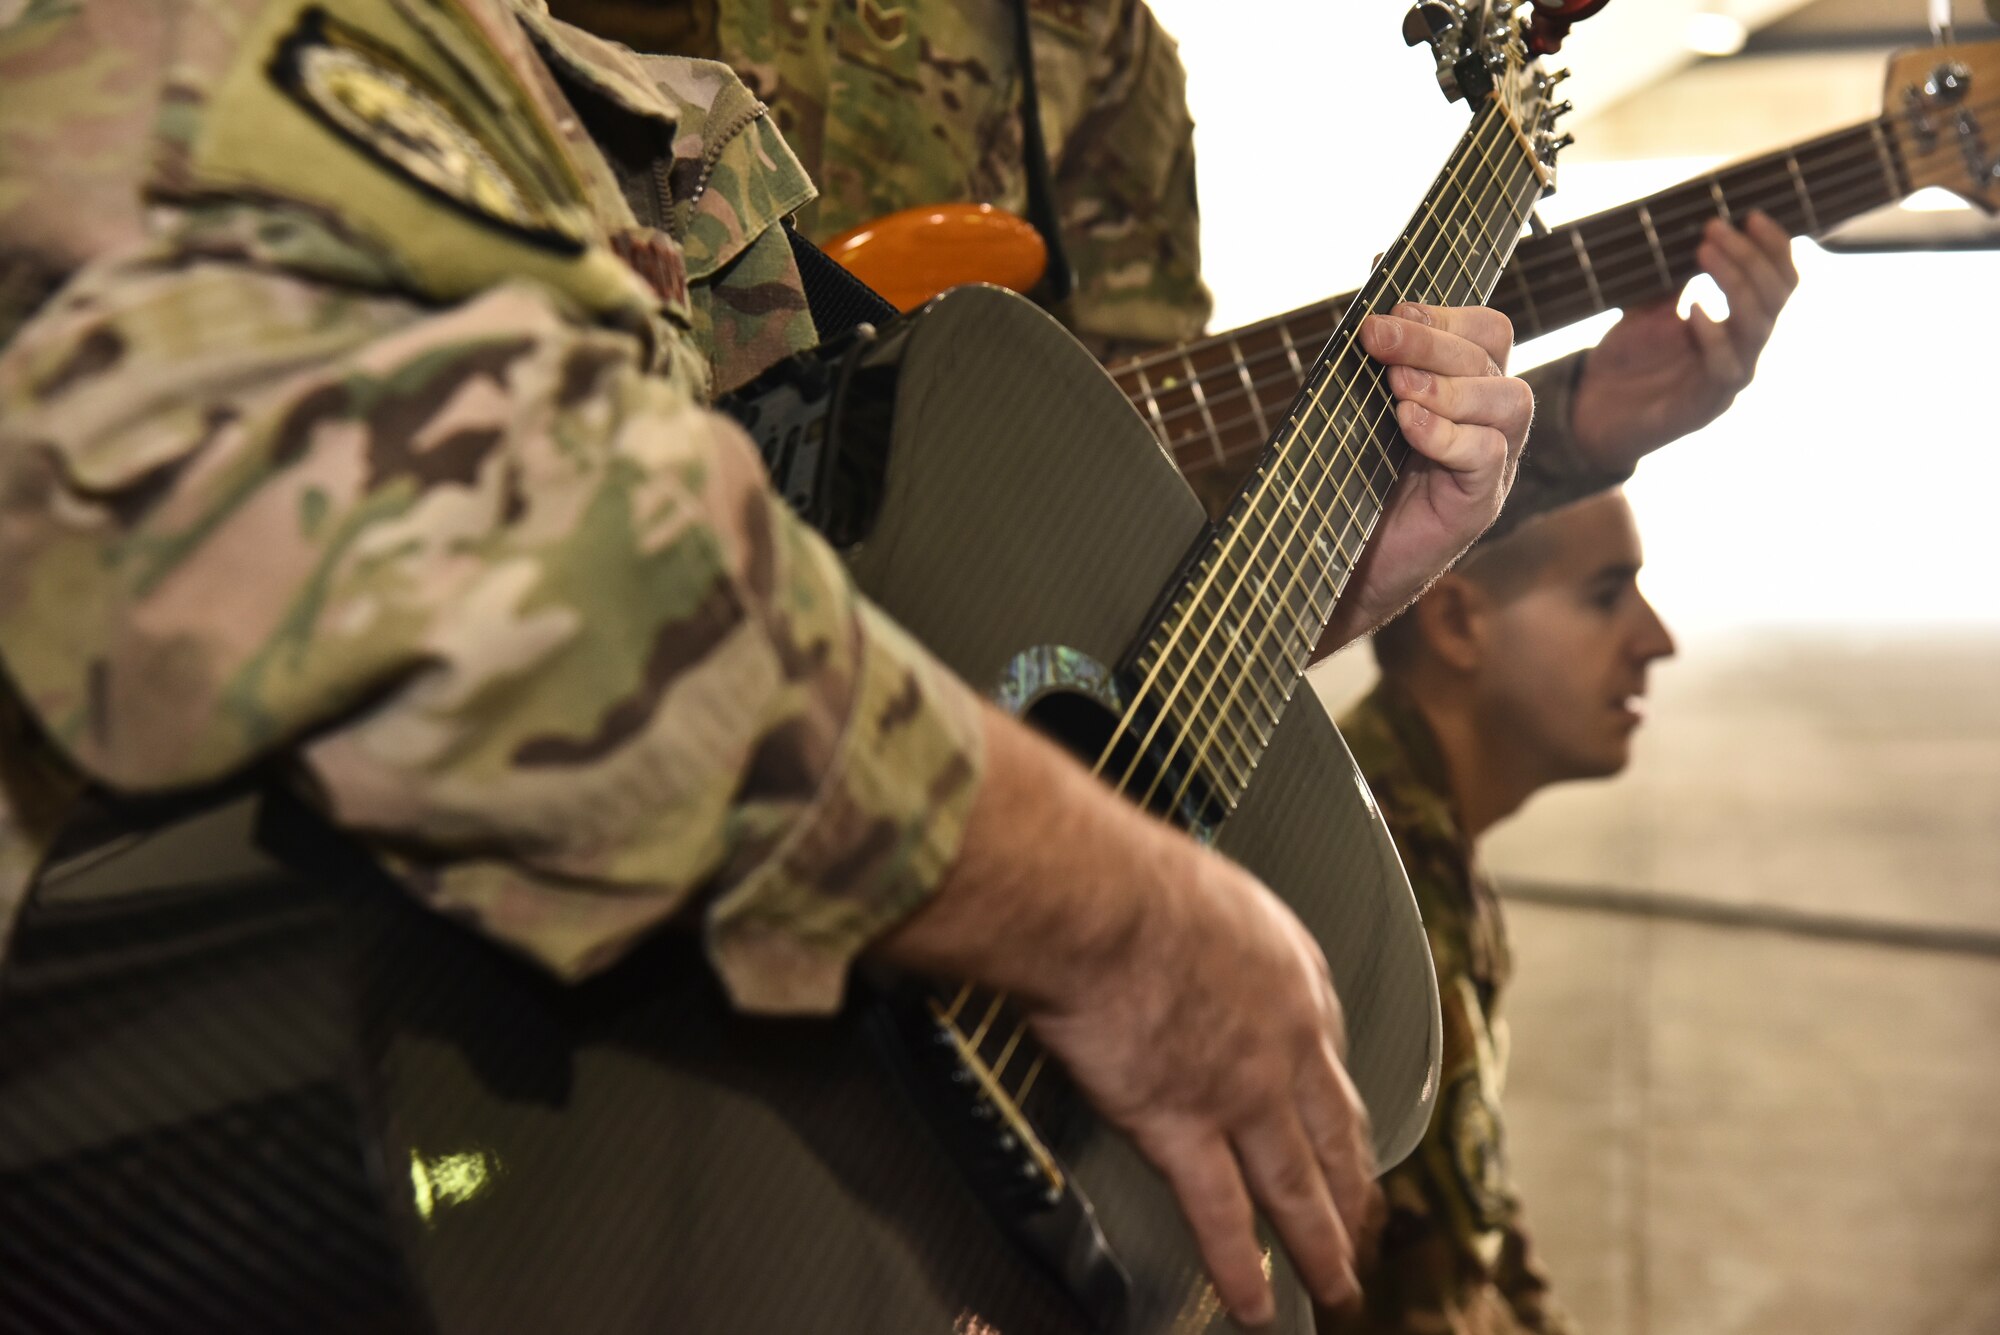 The U.S. Air Forces Central Command Band performs at Al Dhafra Air Base, United Arab Emirates, Dec. 4, 2018. The AFCENT Band rotates several ensembles through the area of responsibility that perform a wide variety of musical styles to appeal to audiences of all ages and backgrounds. (U.S. Air Force photo by Senior Airman Mya M. Crosby)